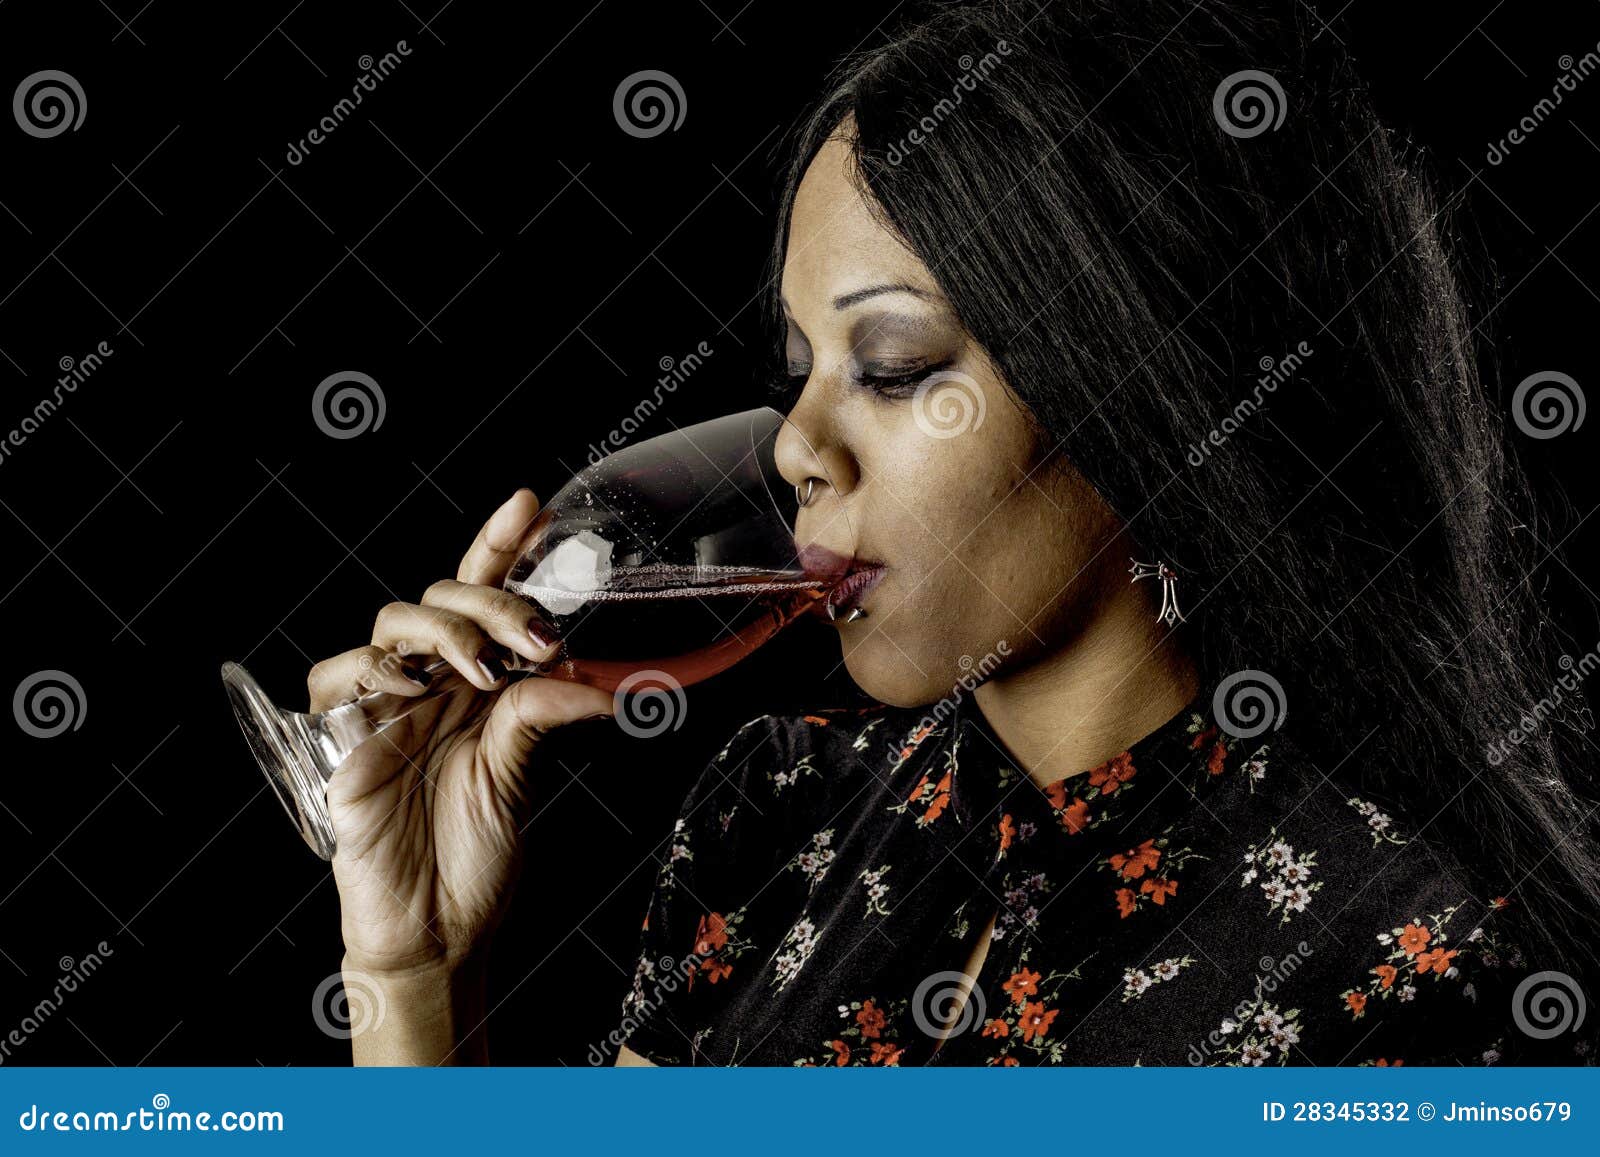 Download Black Woman Drinking Wine Stock Photography - Image: 28345332